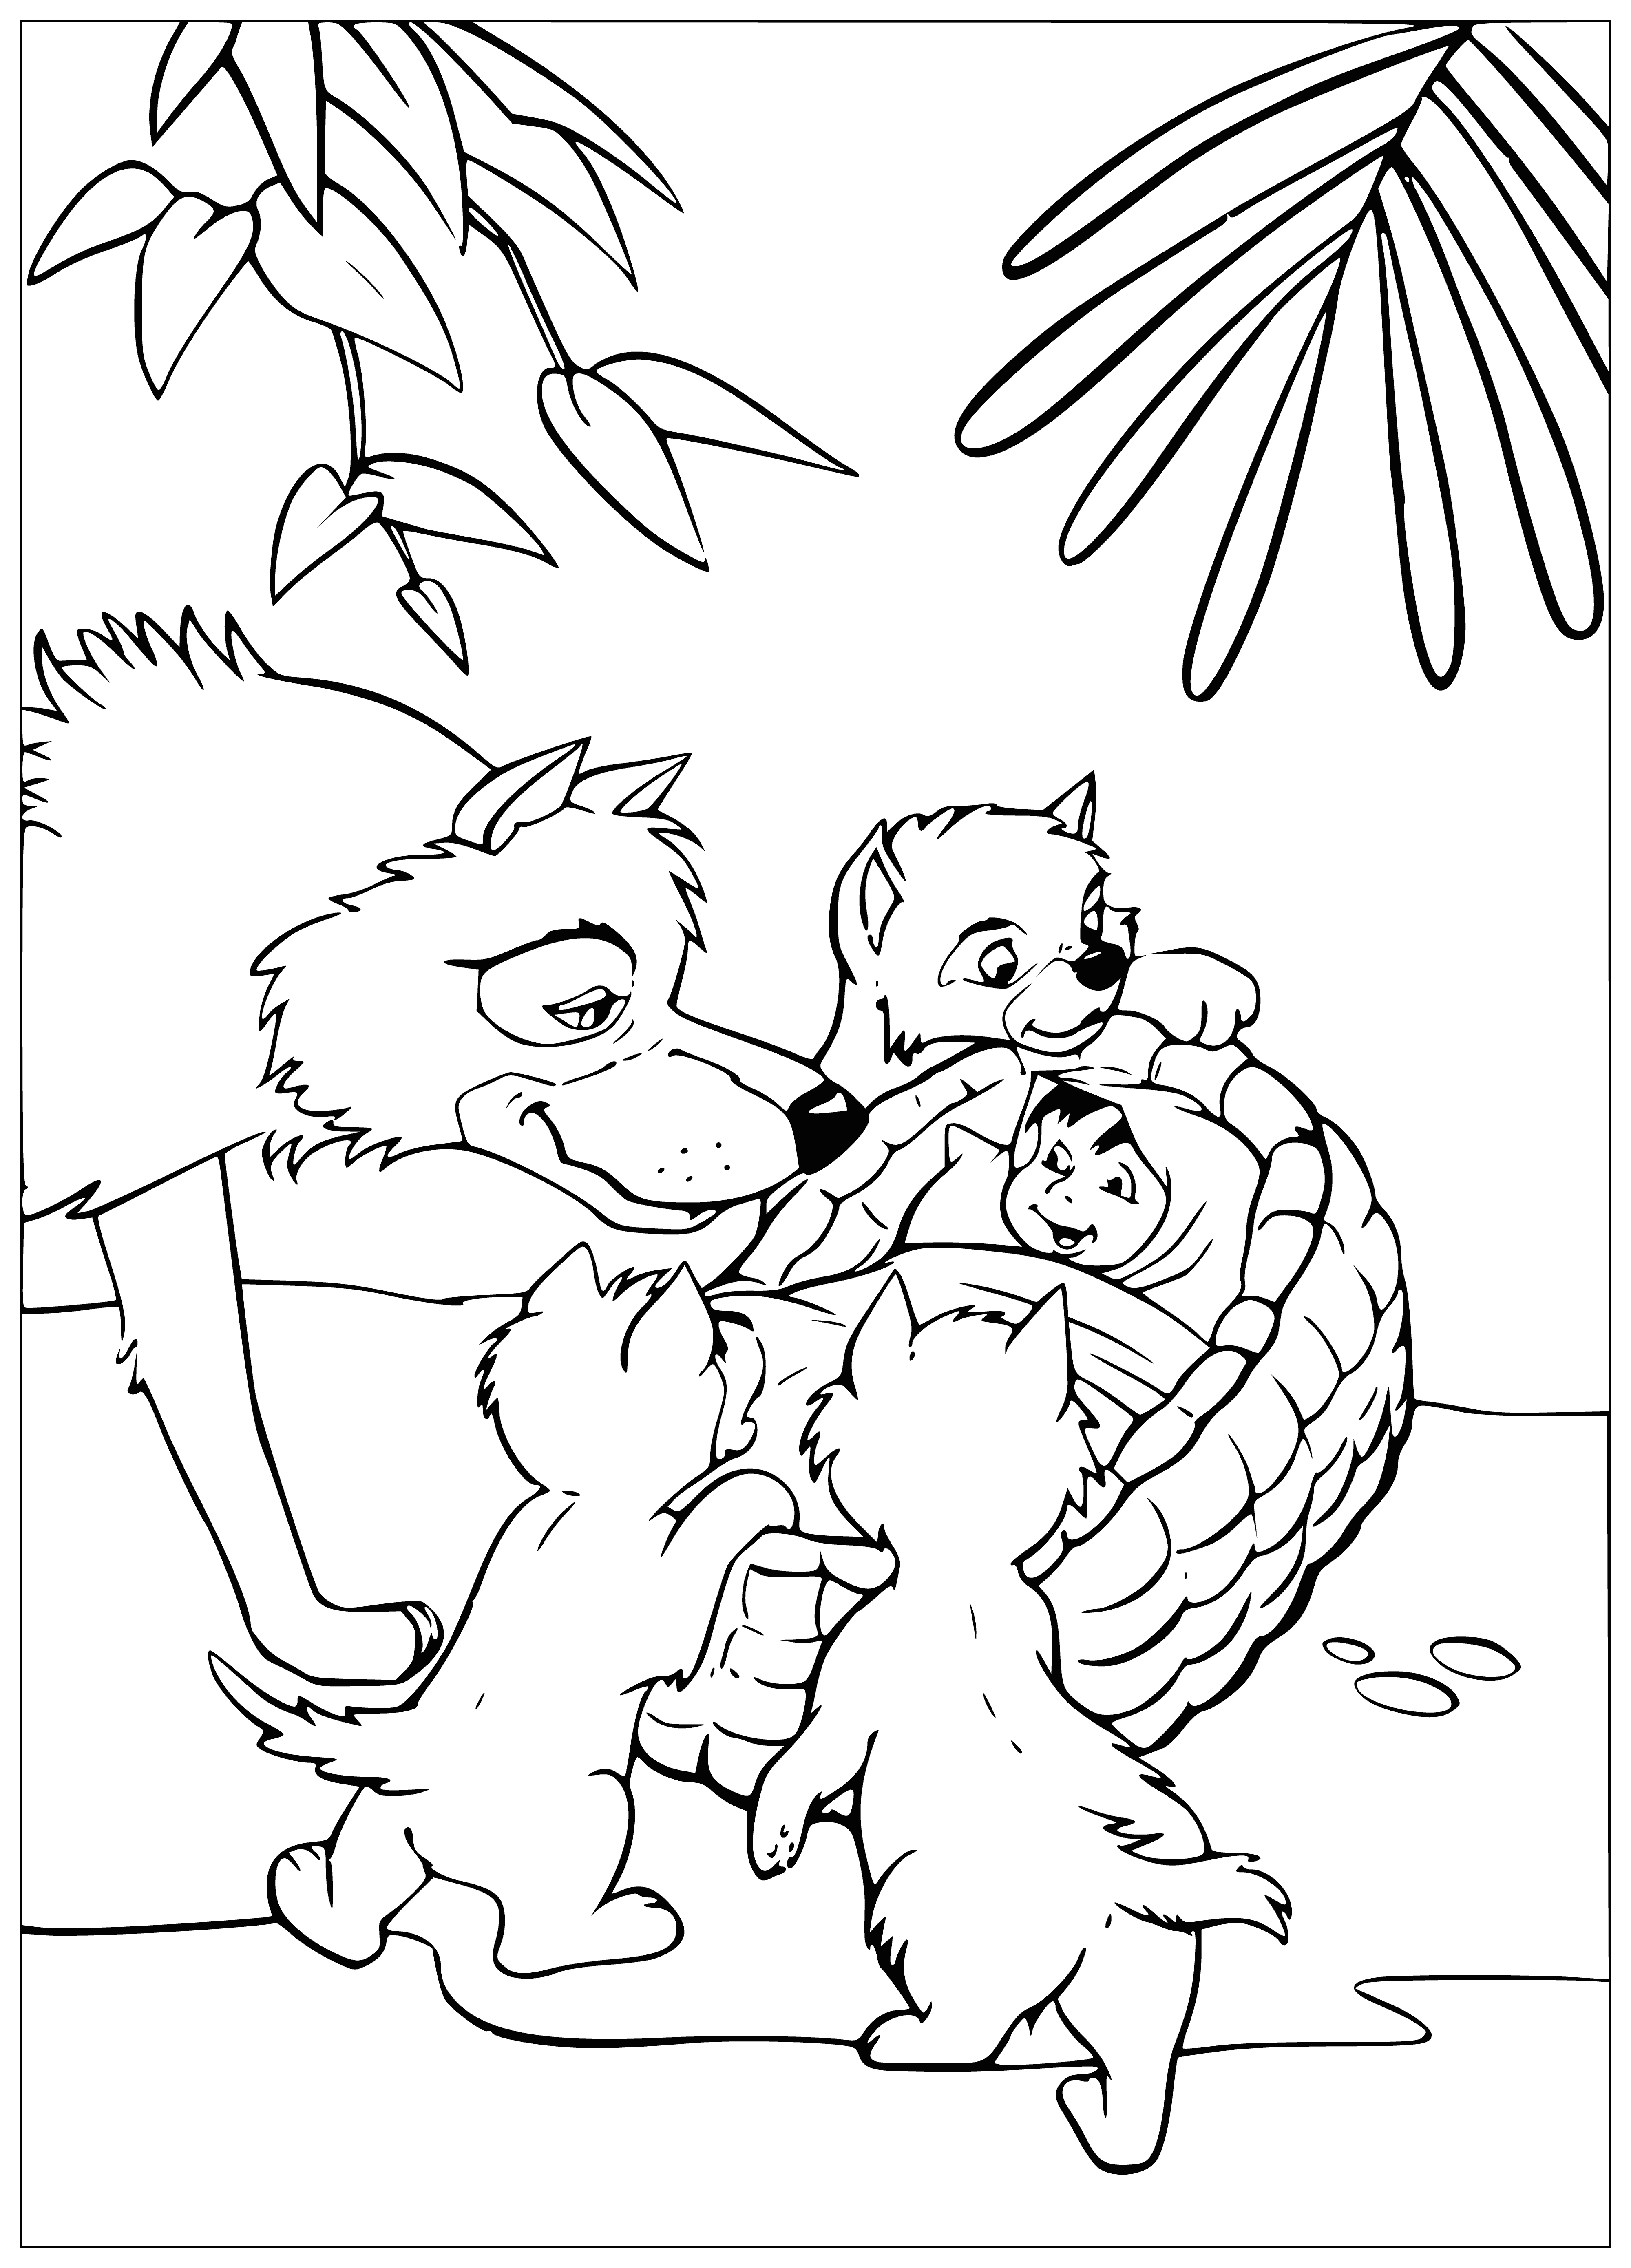 coloring page: Boy stares at fierce wolf in jungle surrounded by pack. Knife in hand, he's ready for challenge. #ColoringPageScene